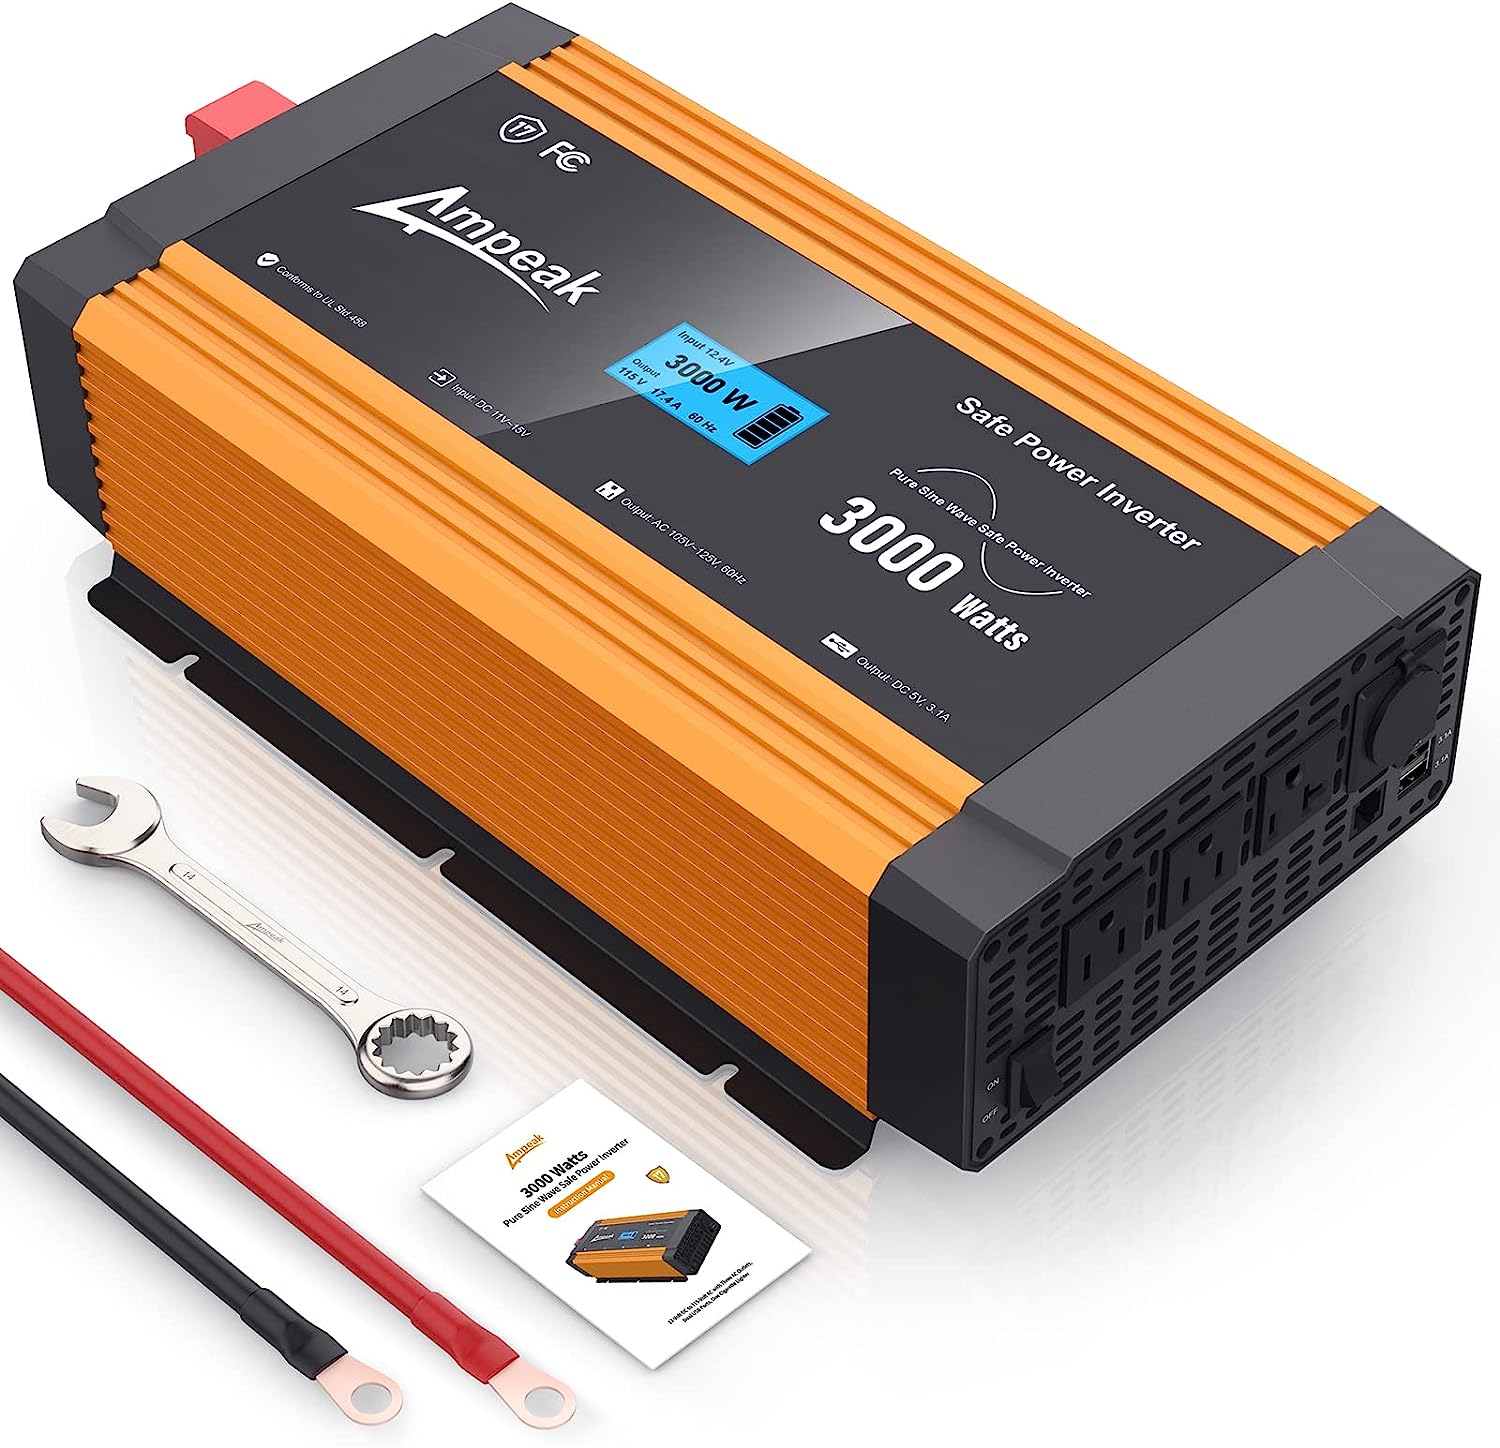  Meind 3000W Power Inverter DC 12V to AC 220V Modified Sine Wave  with Battery Charge Function : Automotive